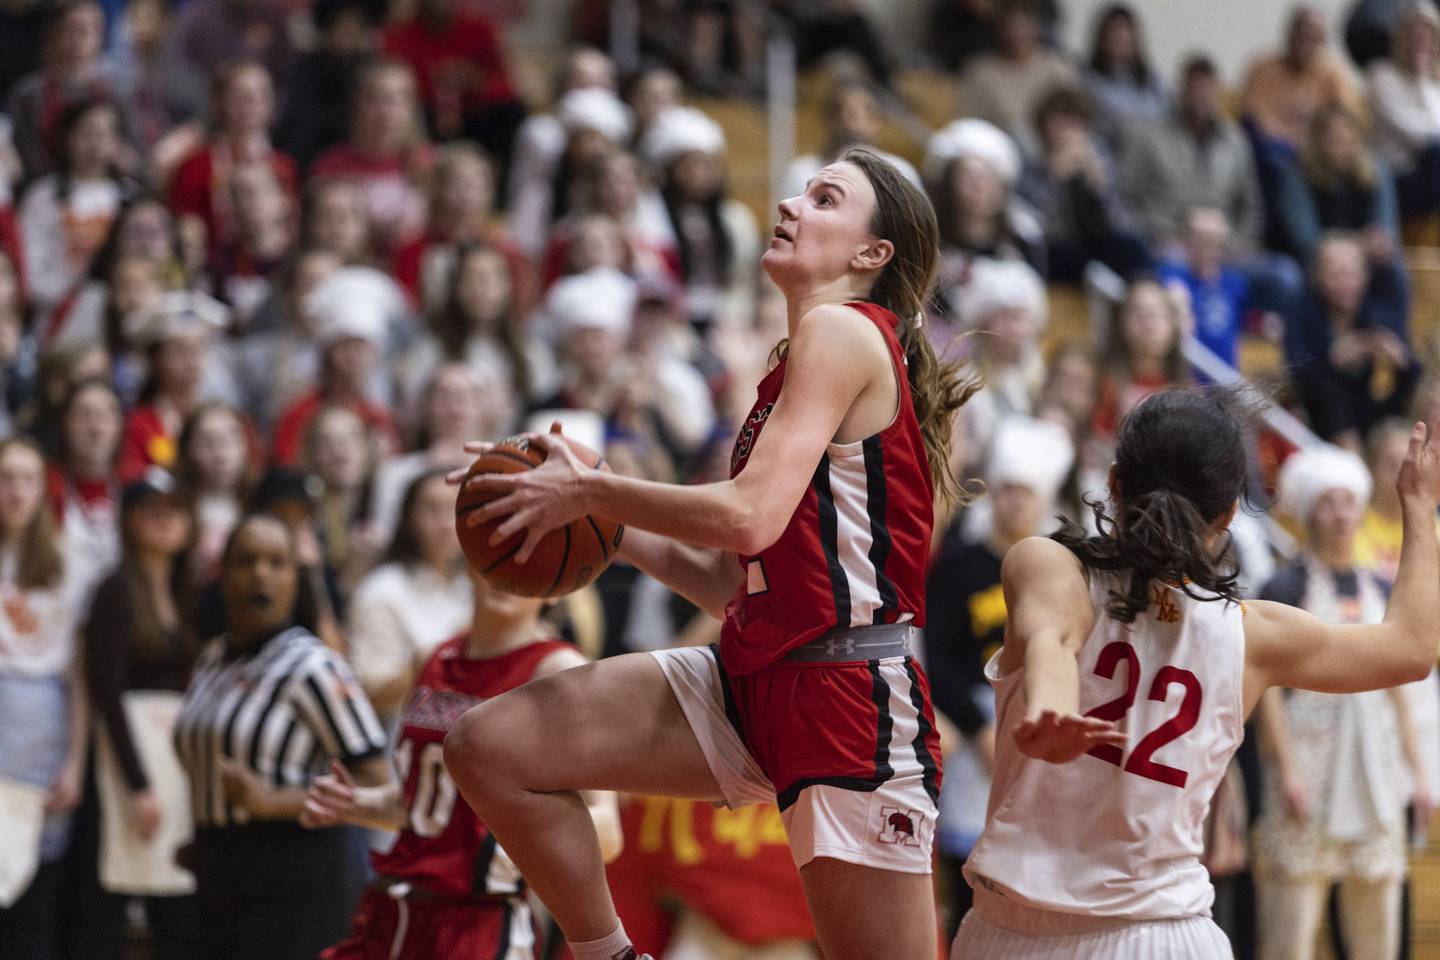 Marist’s Elise Ward (2) goes to the basket as Mother McAuley's Maeve Egan (22) defends during a nonconference game on Thursday, Dec. 8, 2022.